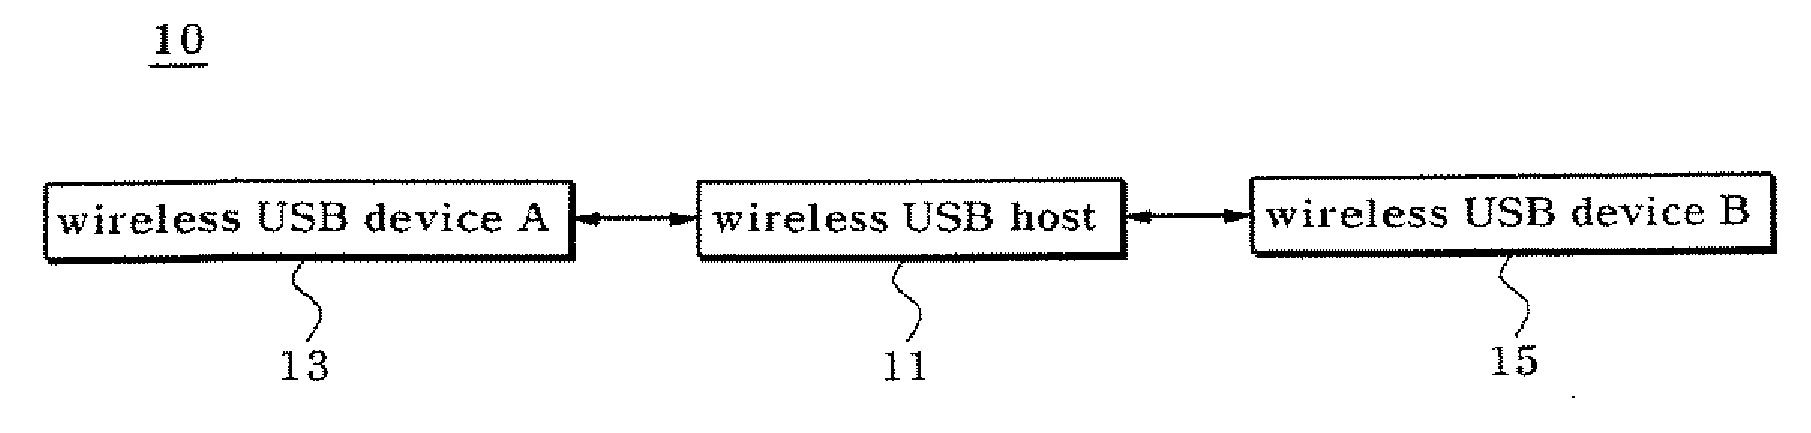 Wireless Universal Serial Bus Dual Role Device